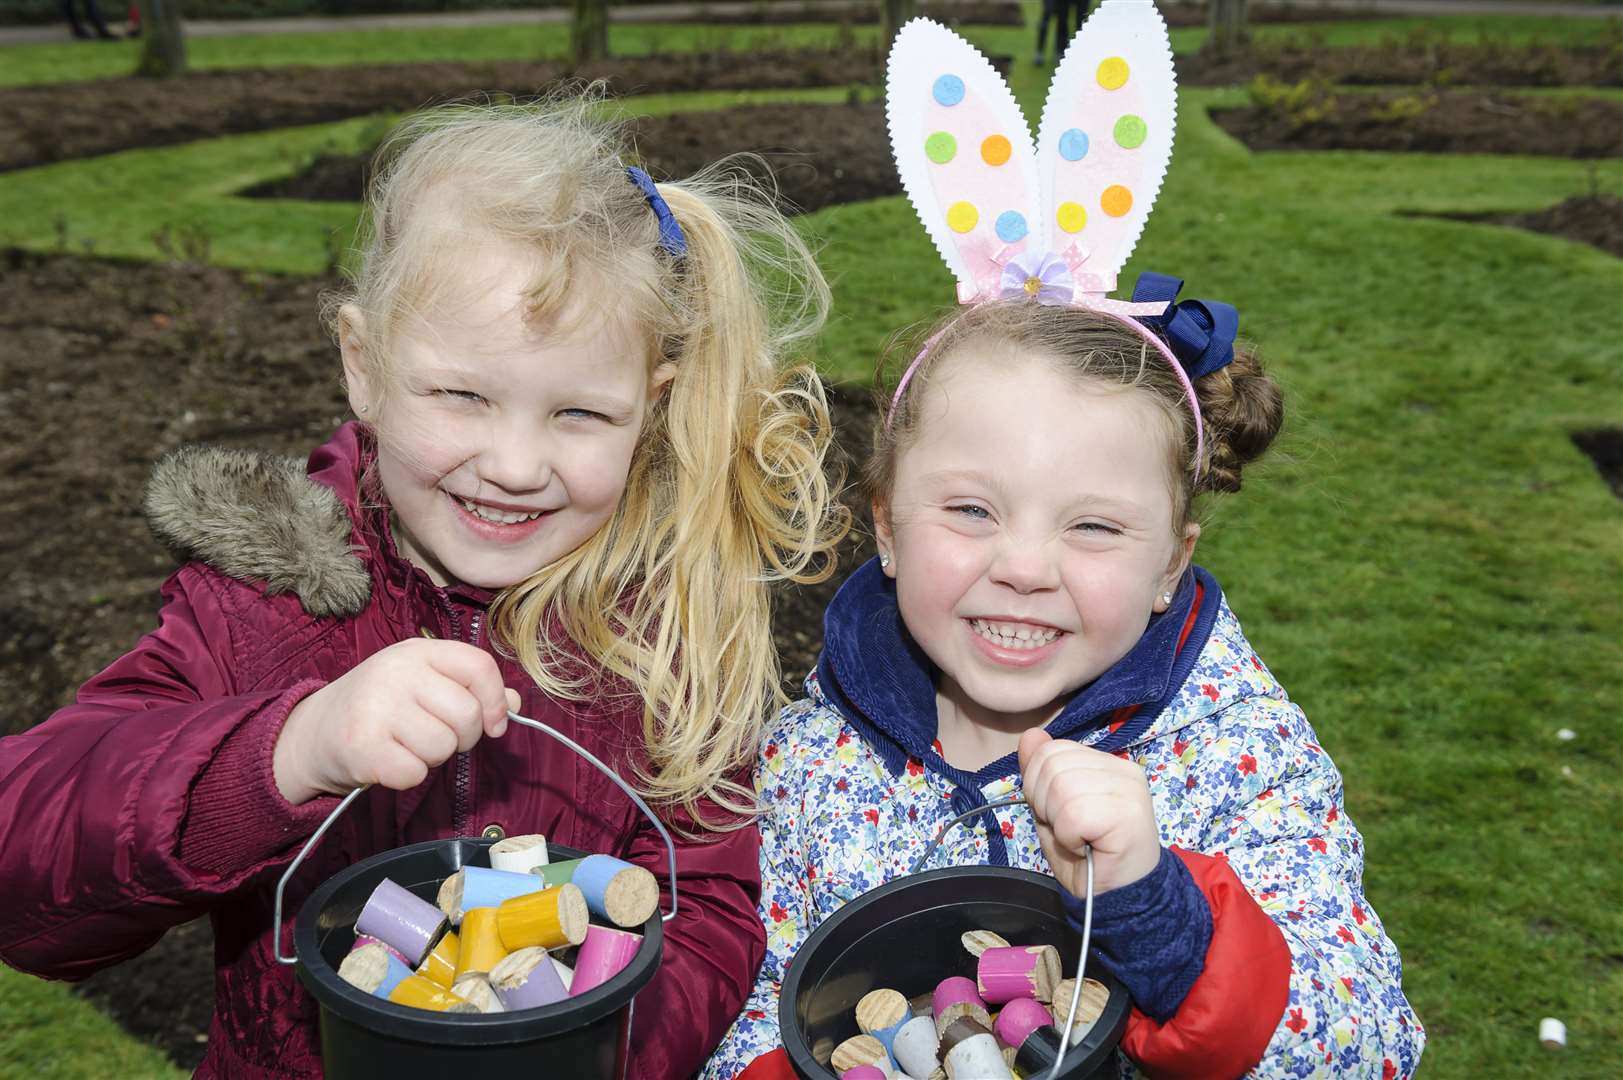 Lilly, 4, and Grace, 4, enjoy an Easter egg hunt organised by Dartford Round Table, at Central Park, Dartford.